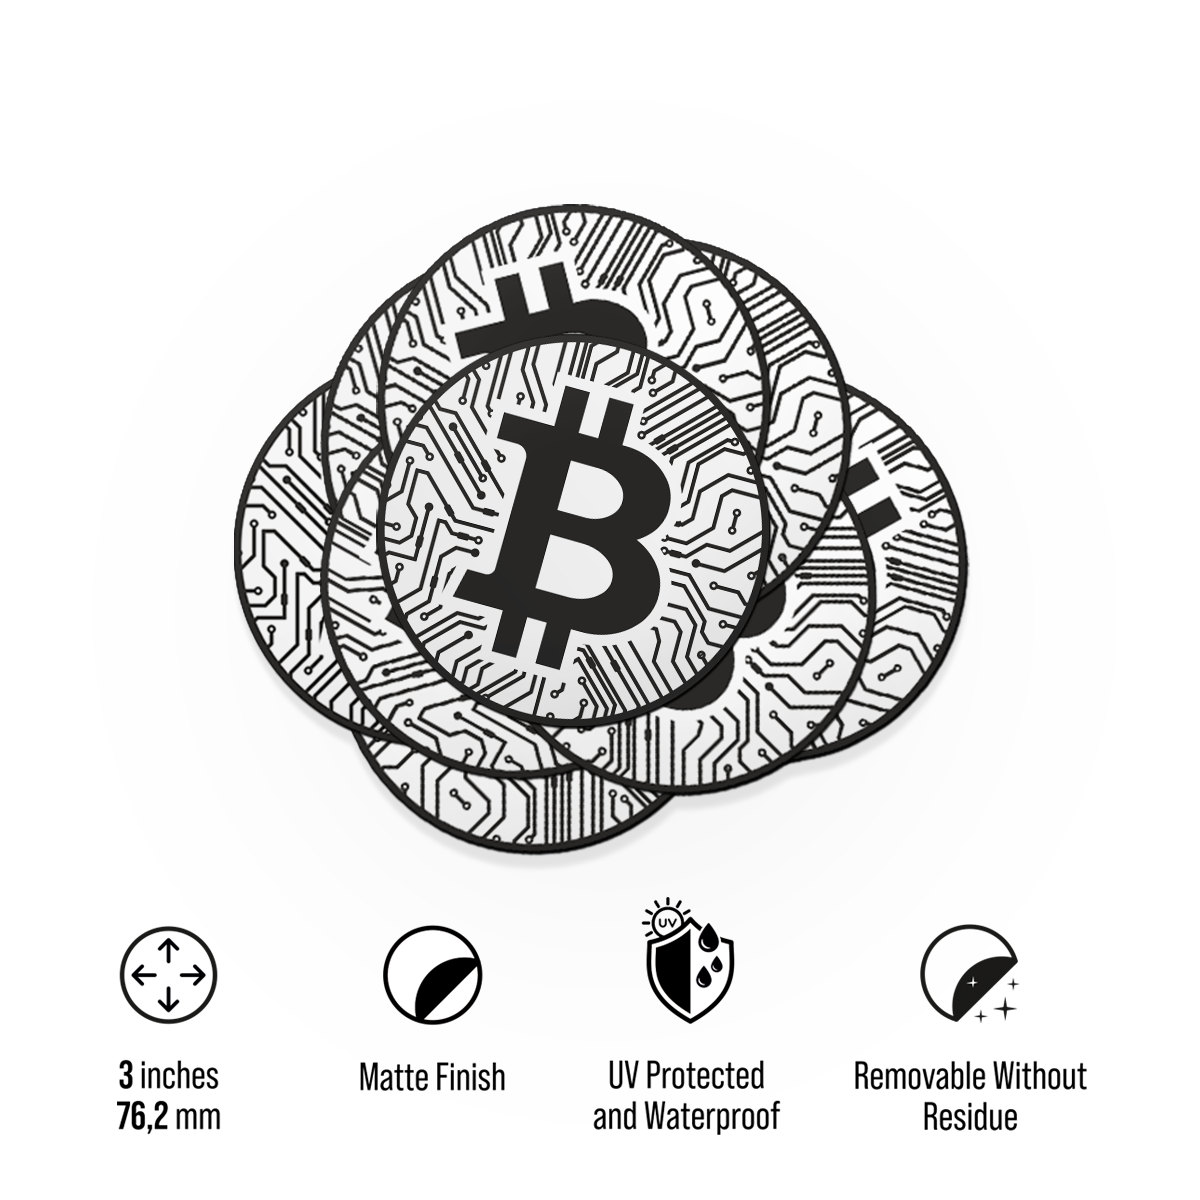 Cryptochips | Bitcoin Sticker Pack Physical Crypto Coin. Collectable cryptocurrency merch you can hodl